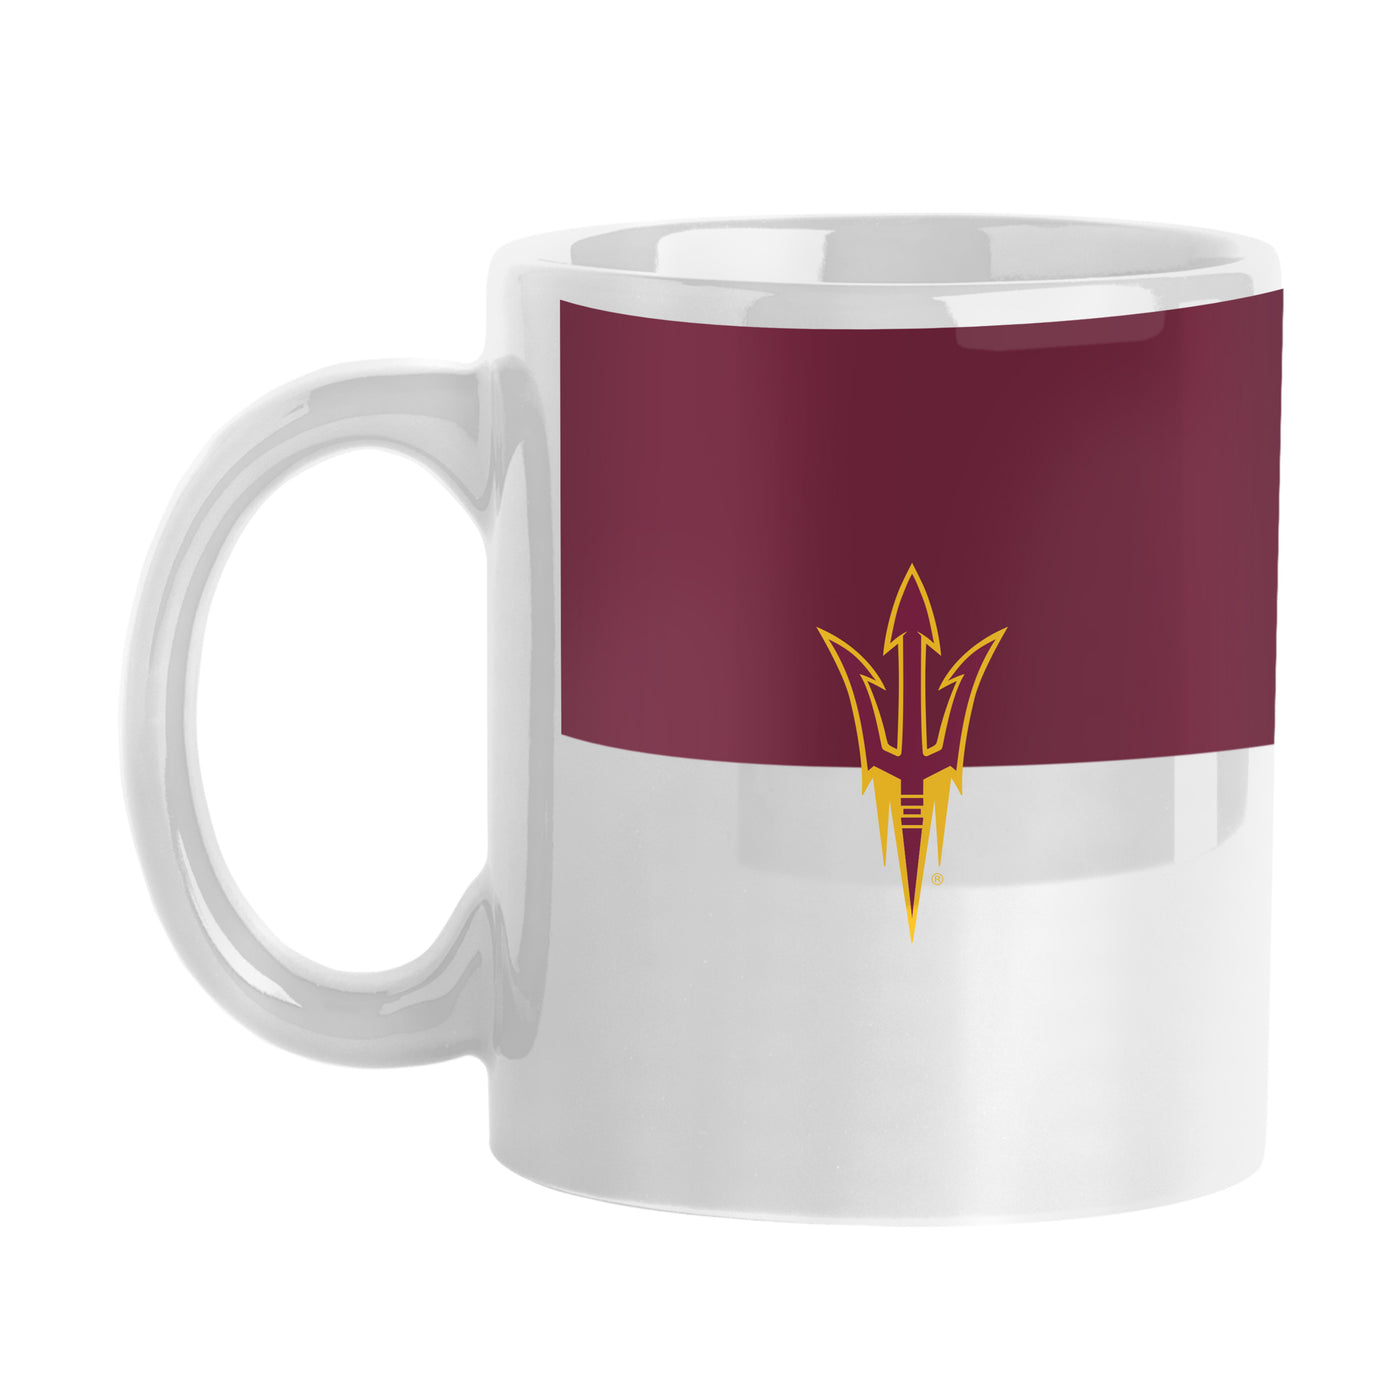 ASU white mug with maroon block on front and a pitchfork on top